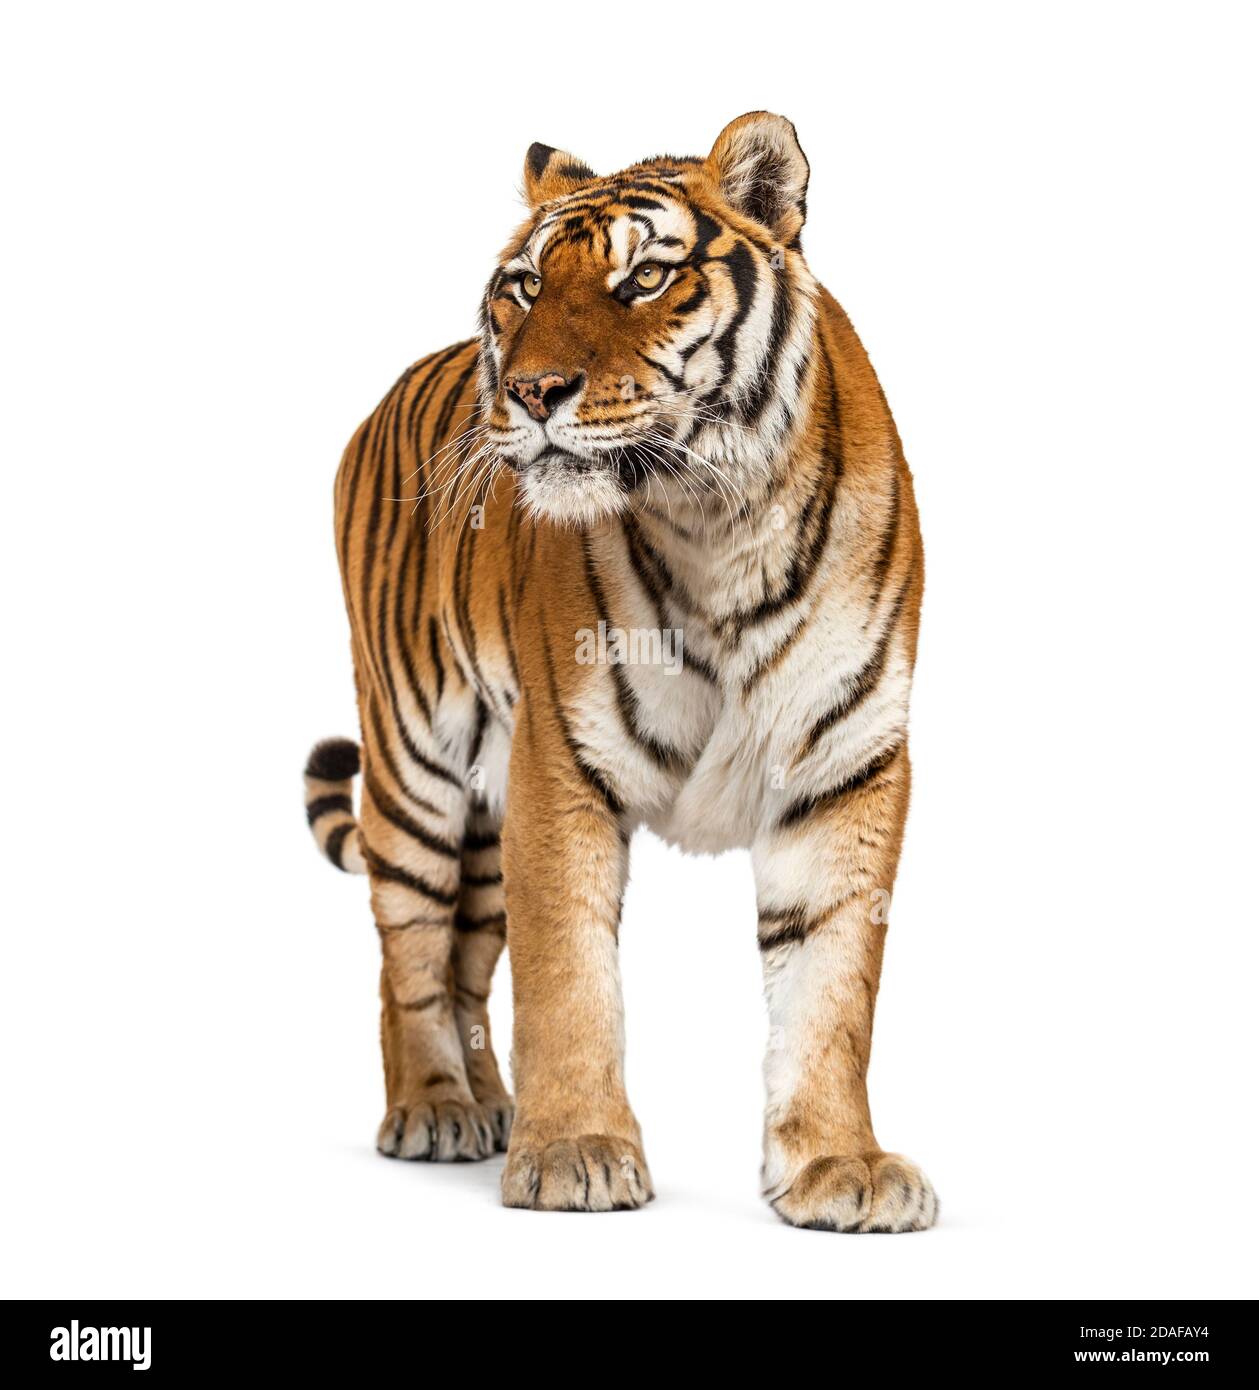 Tiger standing up in front of a white background Stock Photo - Alamy